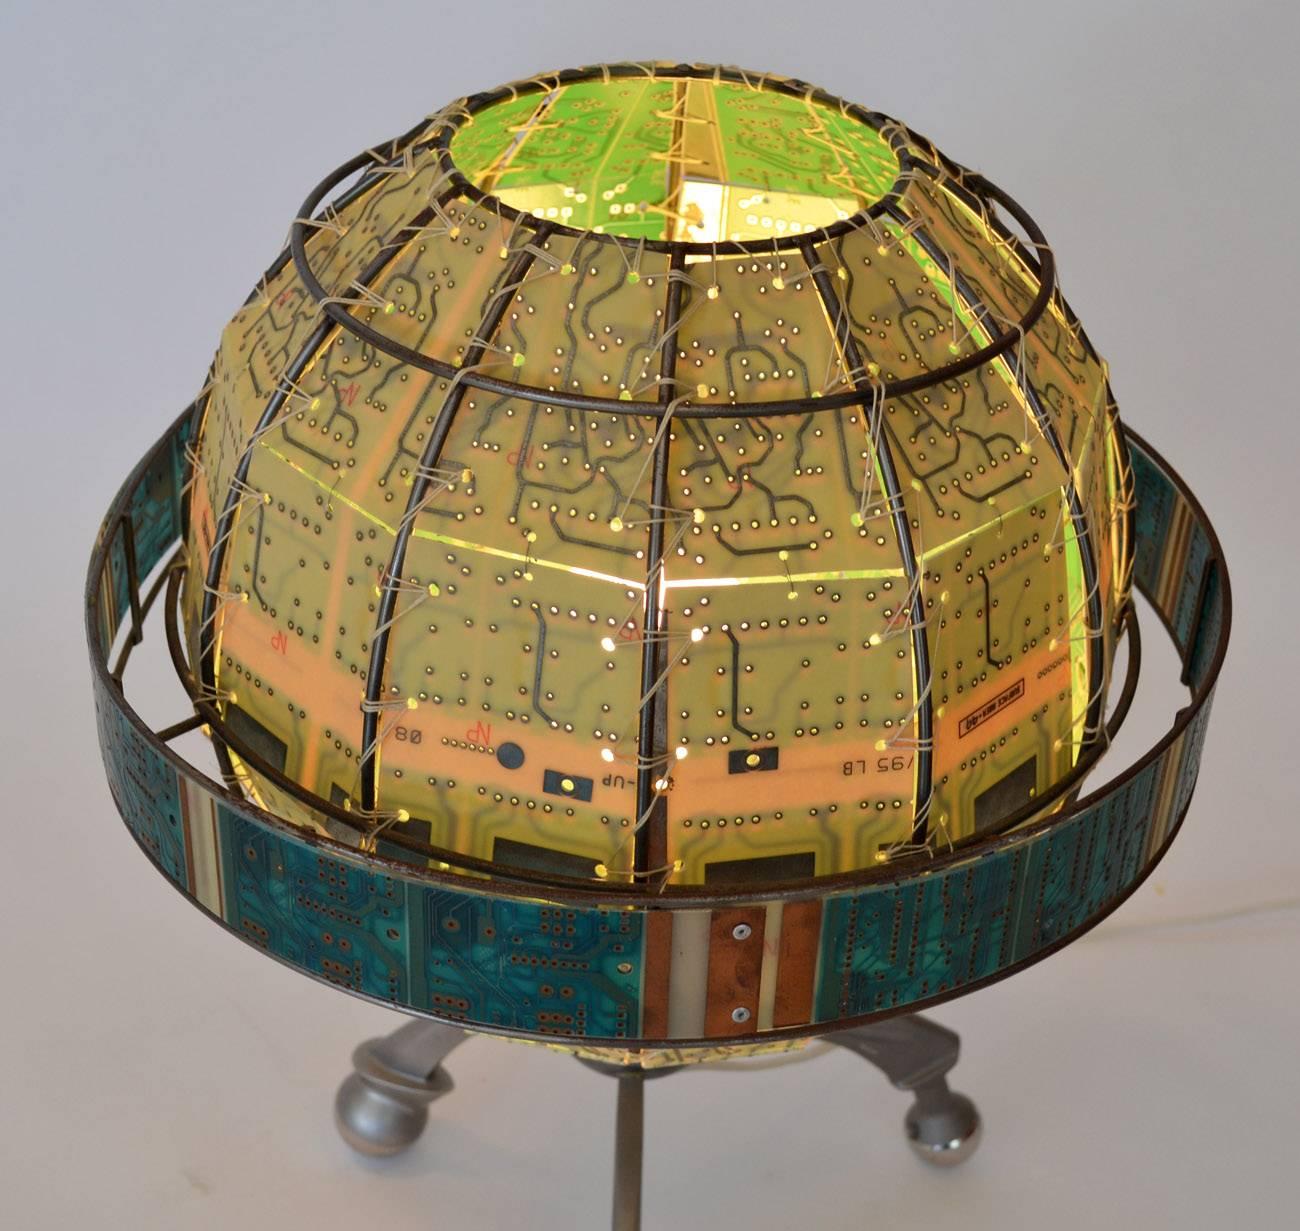 Unique Studio Circuit Board Globe Table Lamp, Signed, USA, 1990's In Good Condition For Sale In Ft Lauderdale, FL